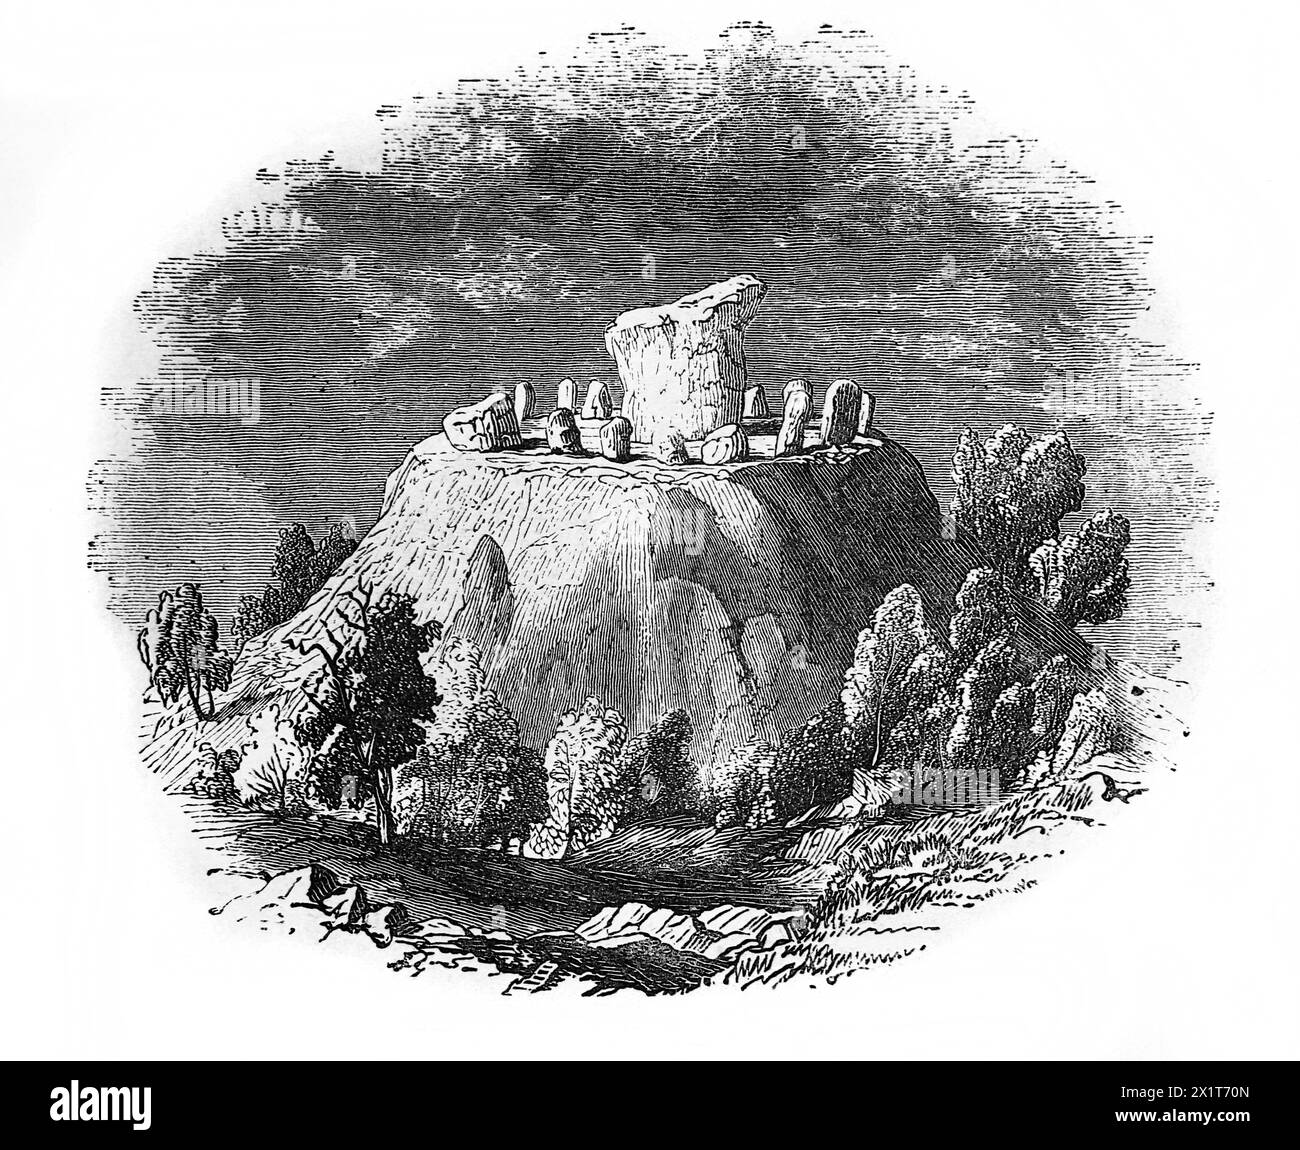 Wood Engraving of Agglestone Rock before it Fell over on its Side Isle of Purbeck Dorset England from 19th Century Illustrated Family Bible Stock Photo